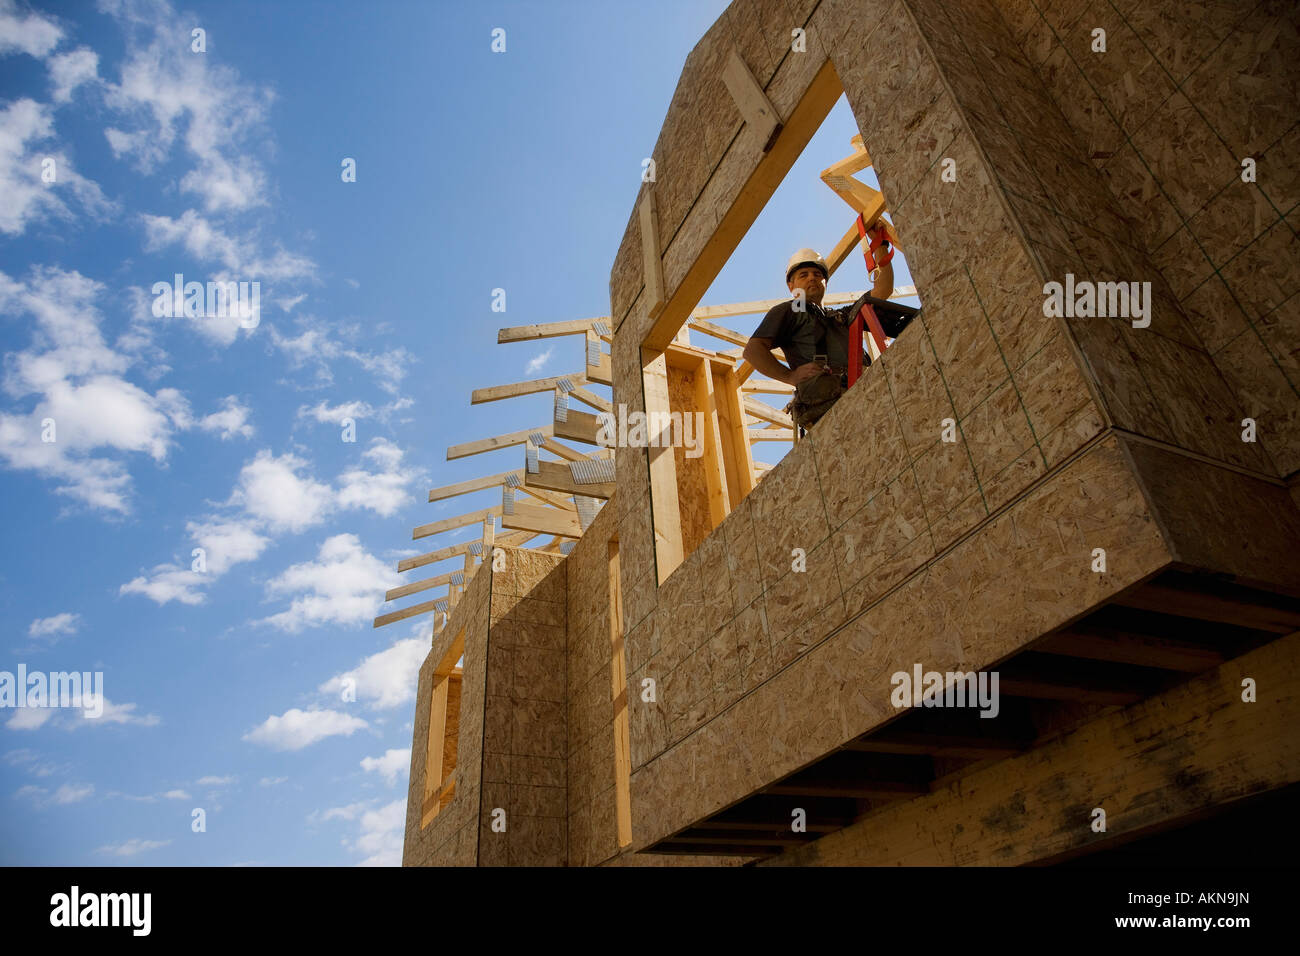 Construction worker building house Stock Photo